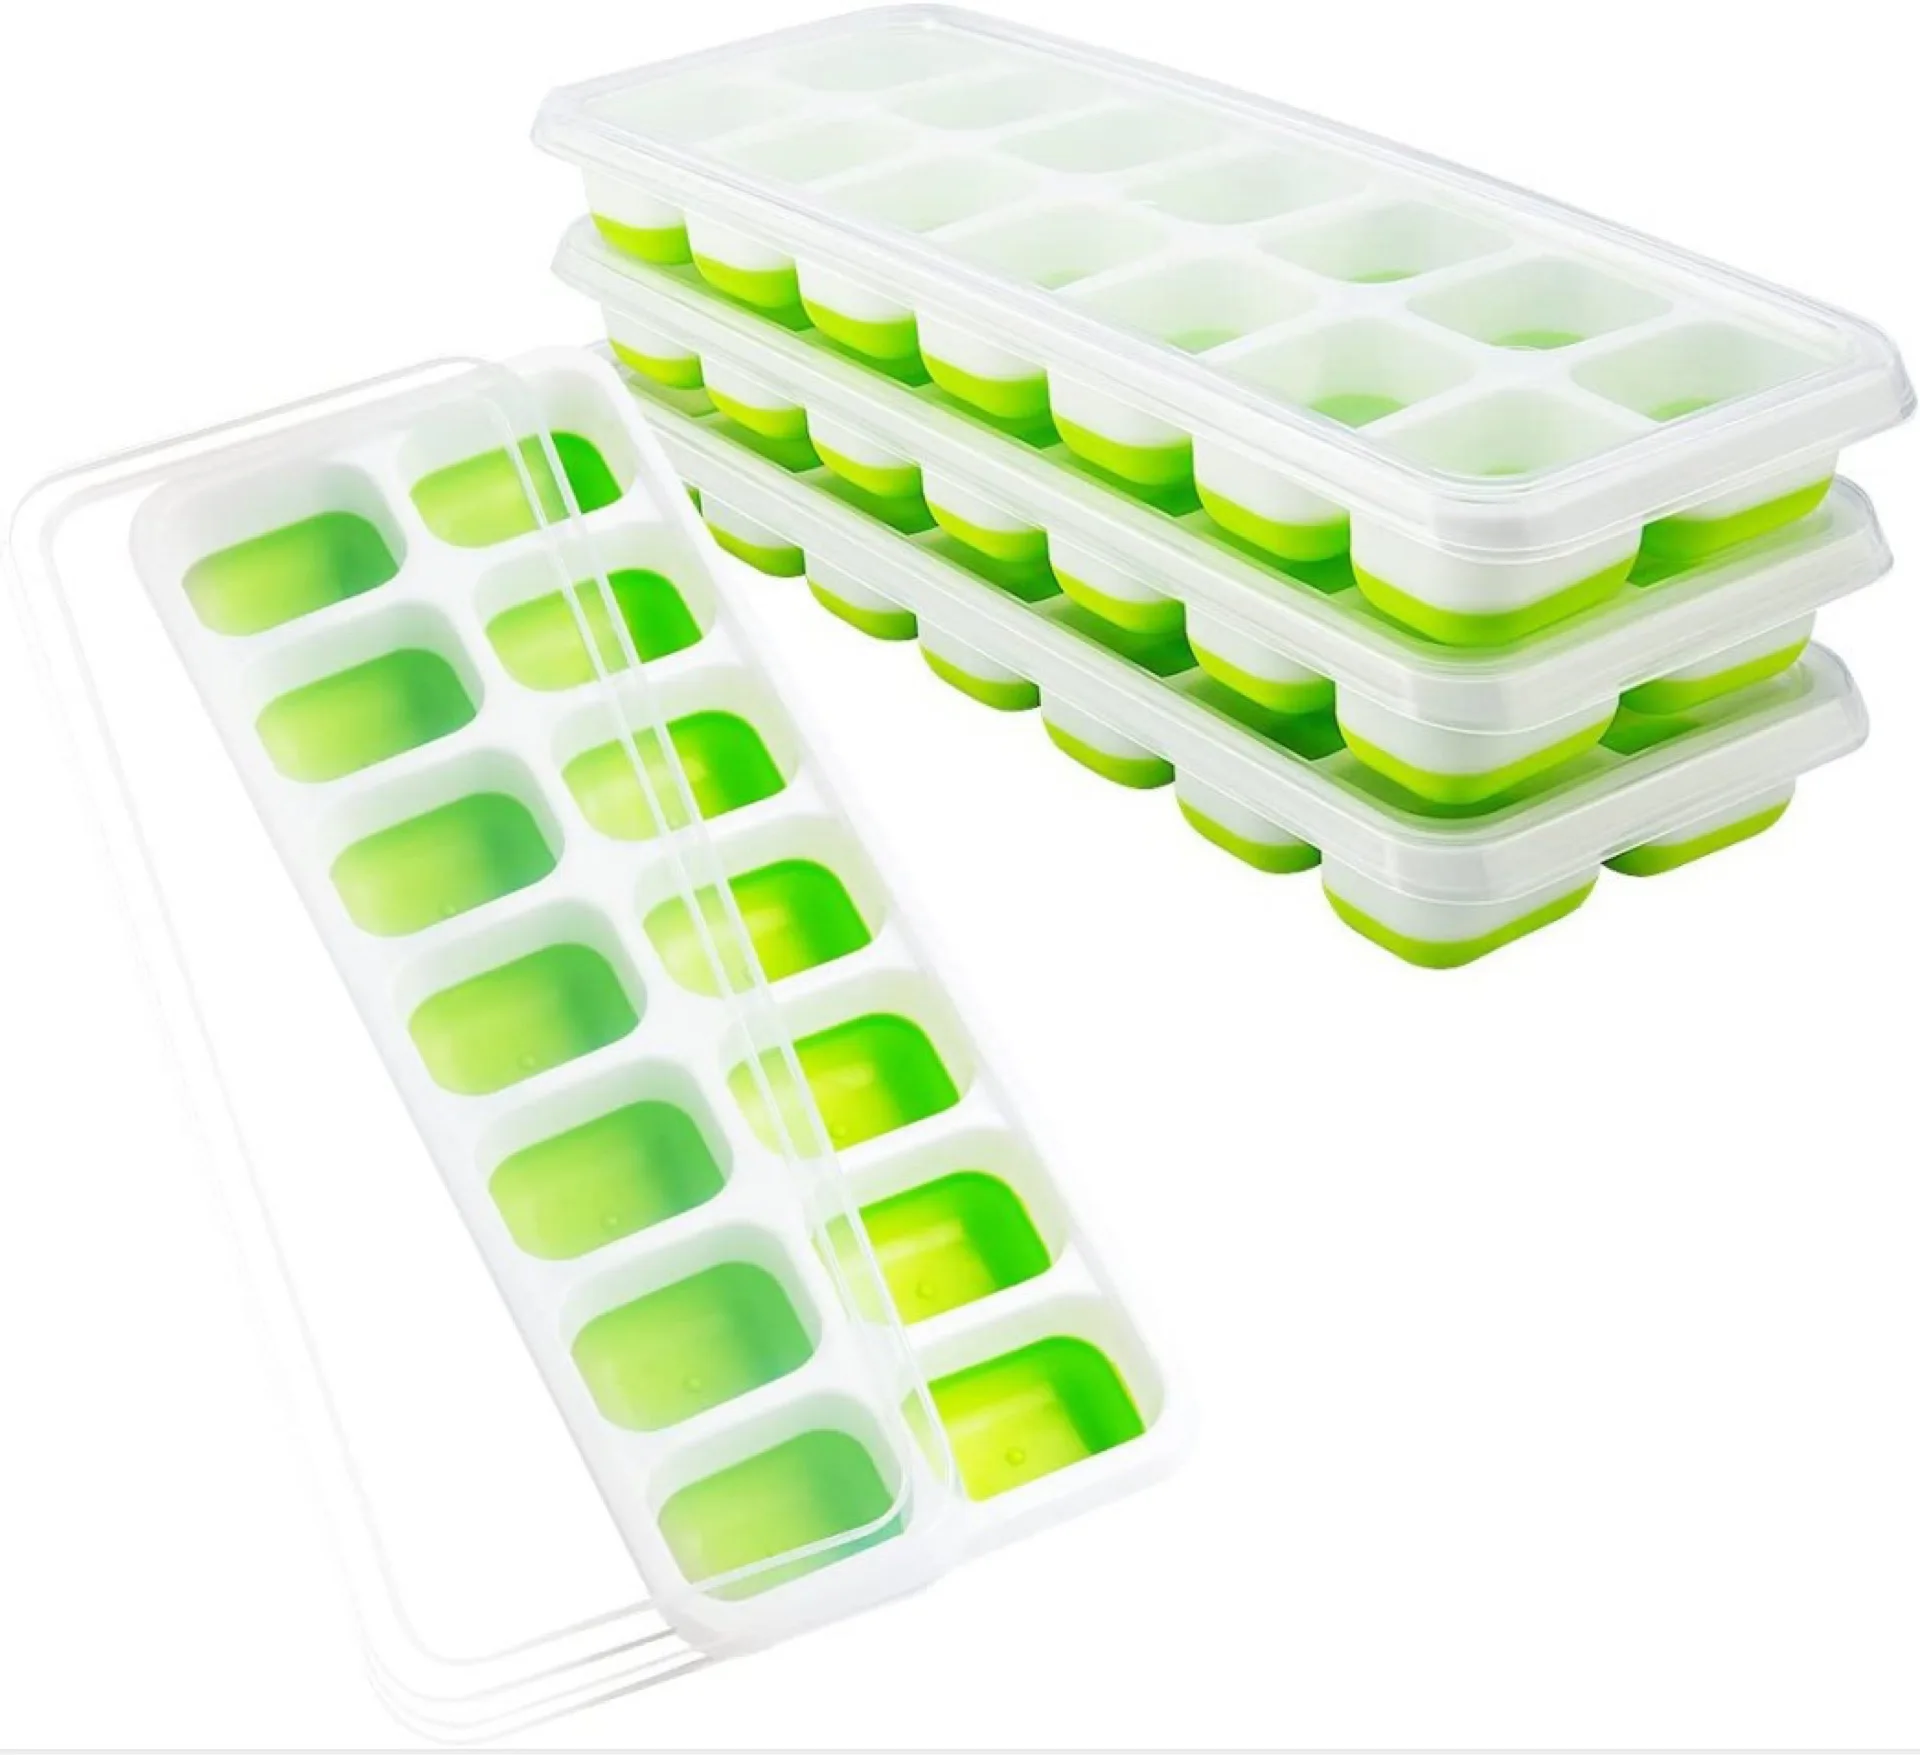 

4 Pack Easy-Release 14-Ice Silicone Ice Cube Trays with Removable Lid, LFGB Certified BPA Free Ice Trays with Covers, Green/blue